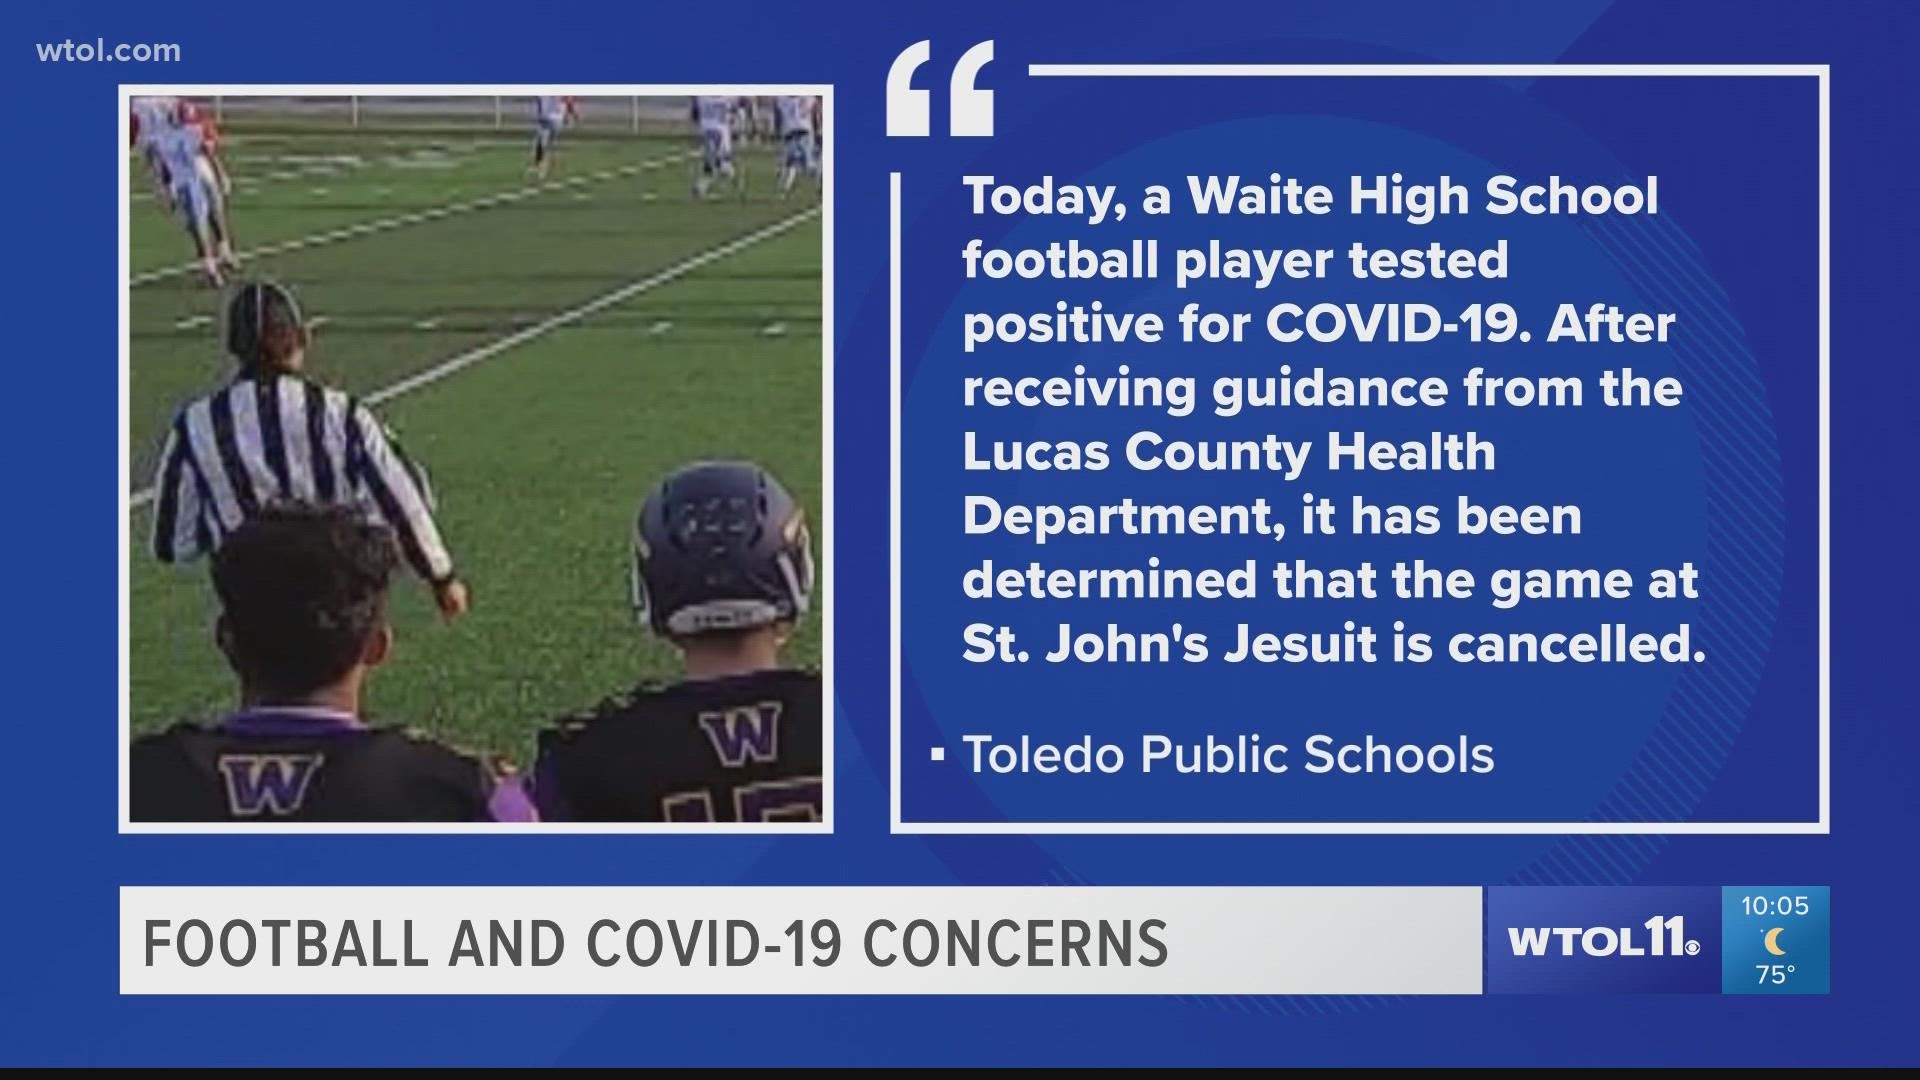 OHSAA official Tim Stried says COVID-19 will continue to have an impact this season, forcing teams to cancel games if players test positive for the virus.